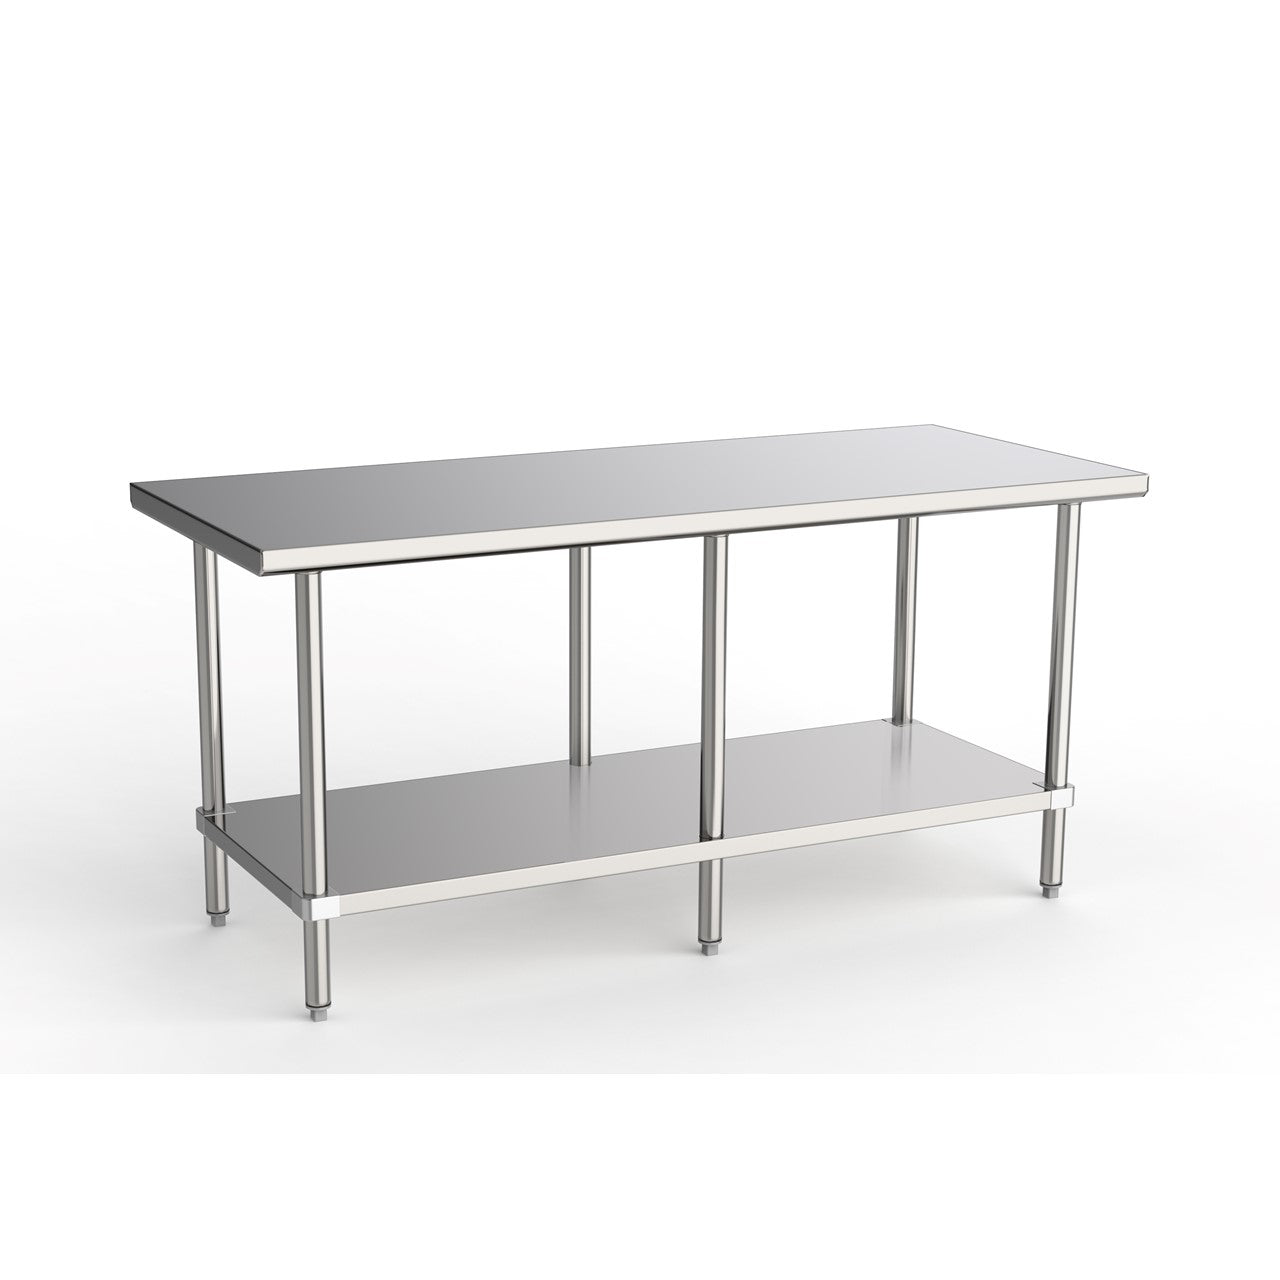 GSW Commercial Grade Flat Top Work Table with Stainless Steel Top, Galvanized Undershelf & Legs, Adjustable Bullet Feet, NSF/ETL Approved to Meet Sanitation Food Service Standard 37 (30"W x 72"L x 35"H)